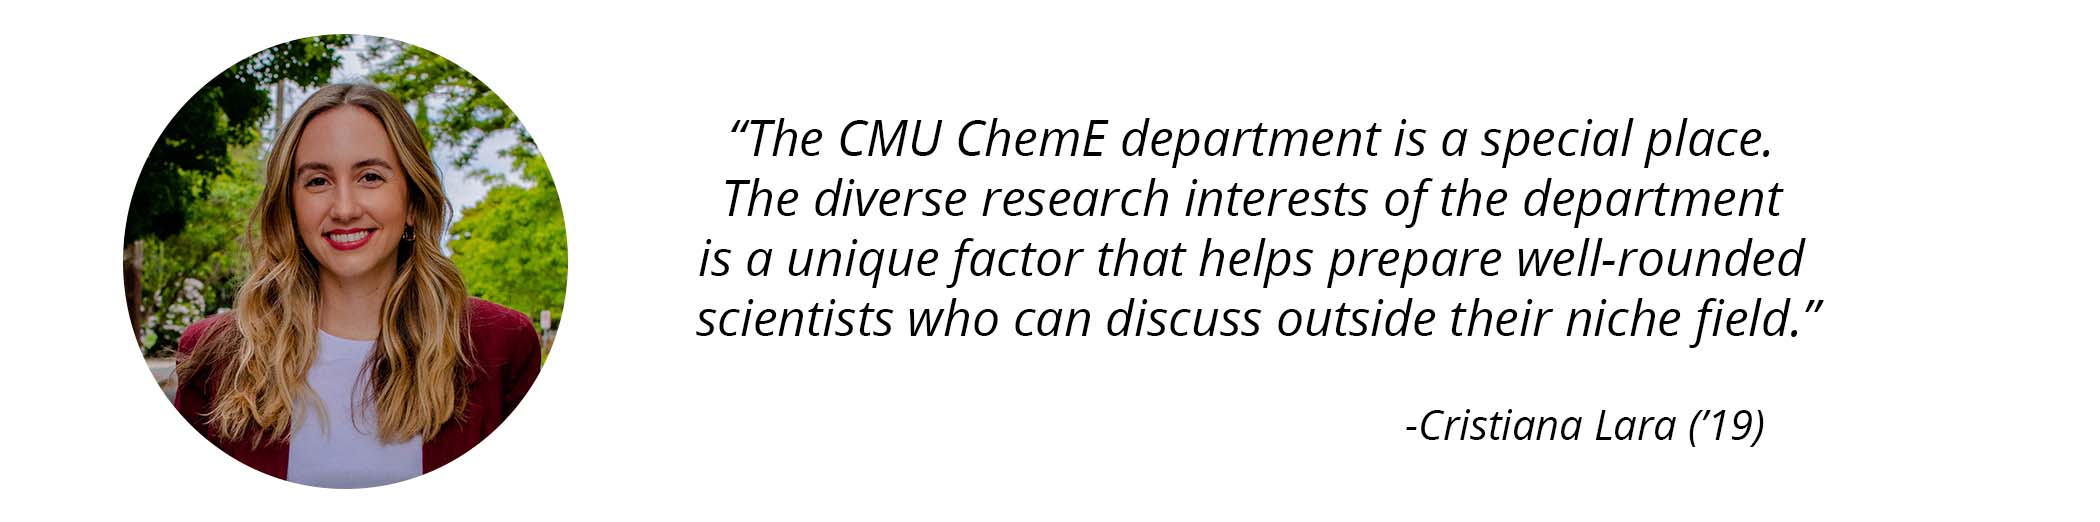 Cristiana Lara ('19) photo and quote - The CMU ChemE department is a special place. The diverse research interest of the department is a unique factor that helps prepare well-rounded scientists who can discuss outside of their niche field." 